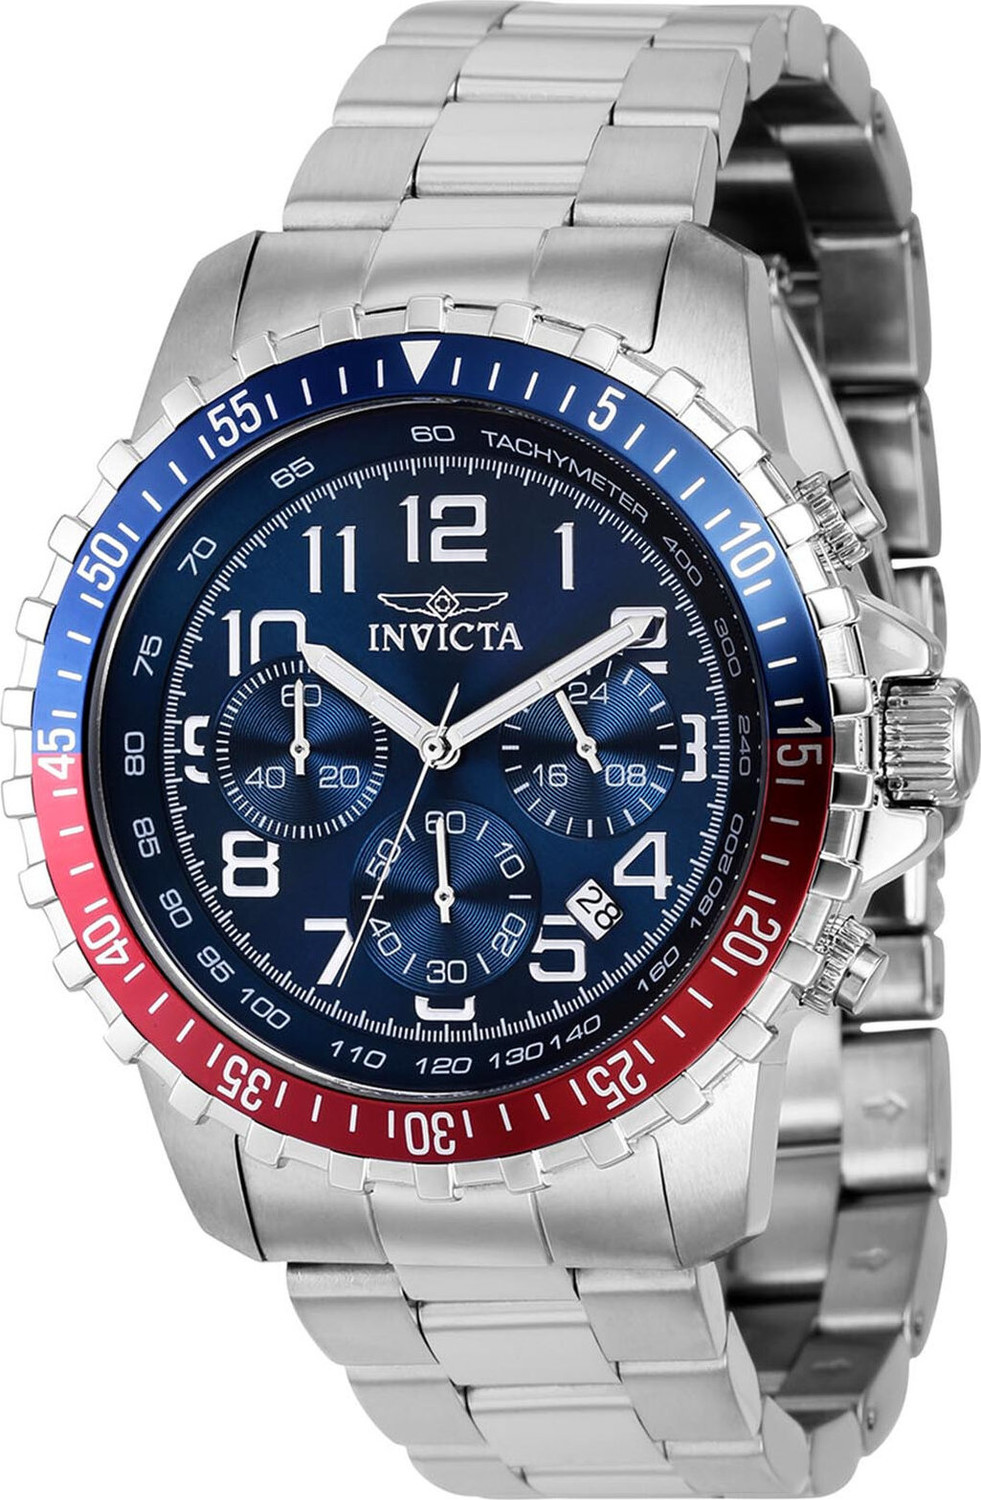 Hodinky Invicta Watch 39123 Silver/Red/Navy